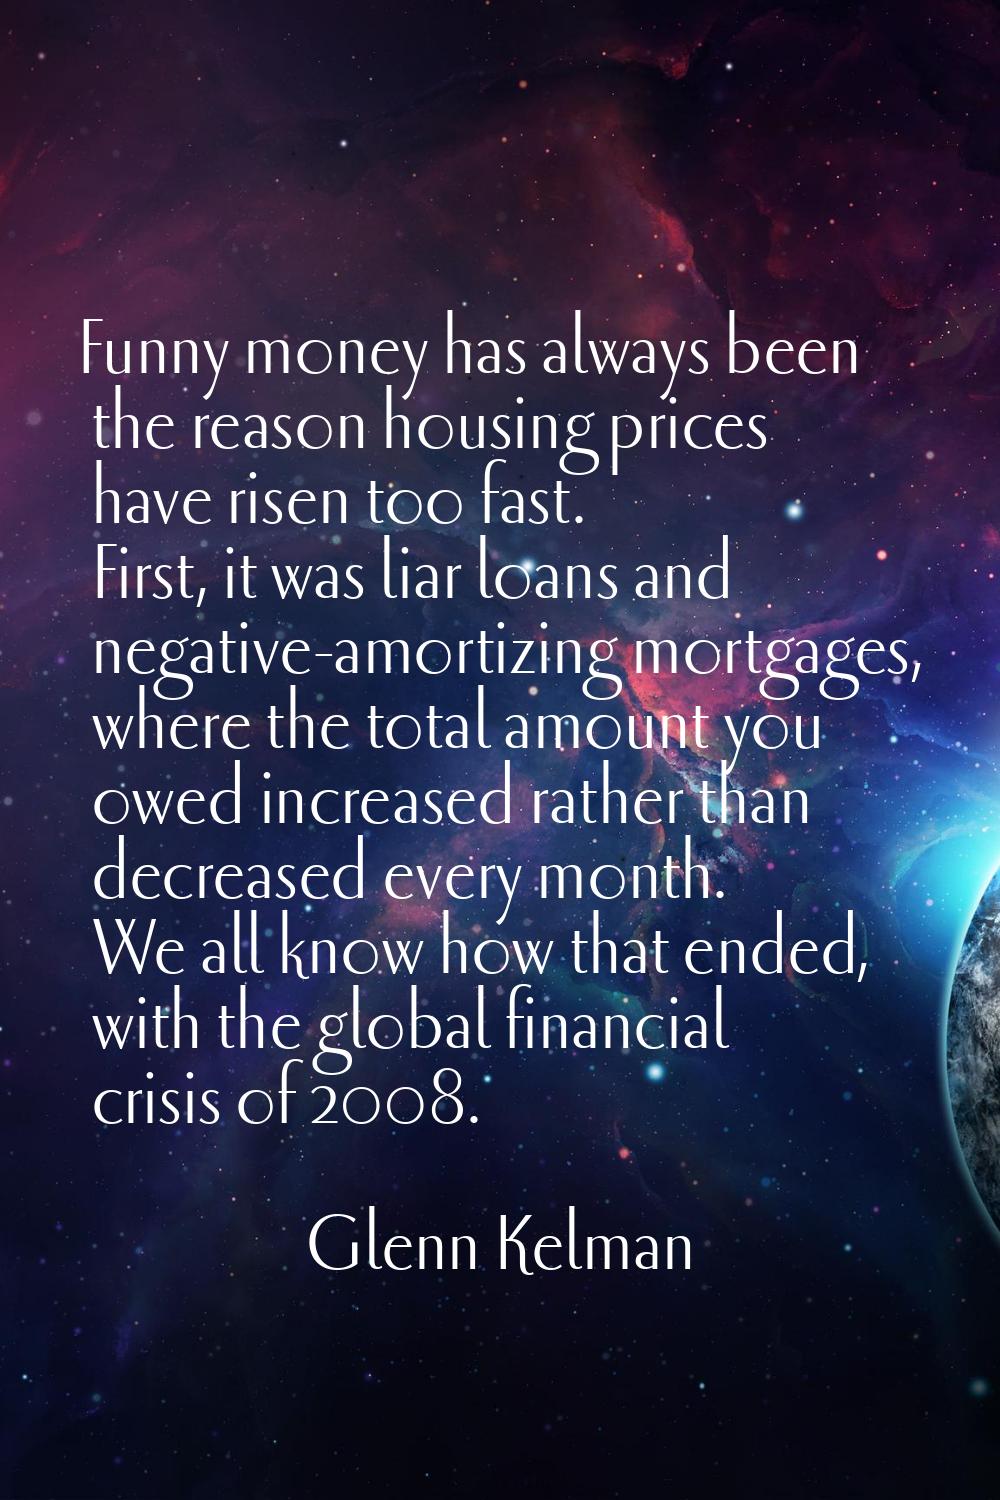 Funny money has always been the reason housing prices have risen too fast. First, it was liar loans